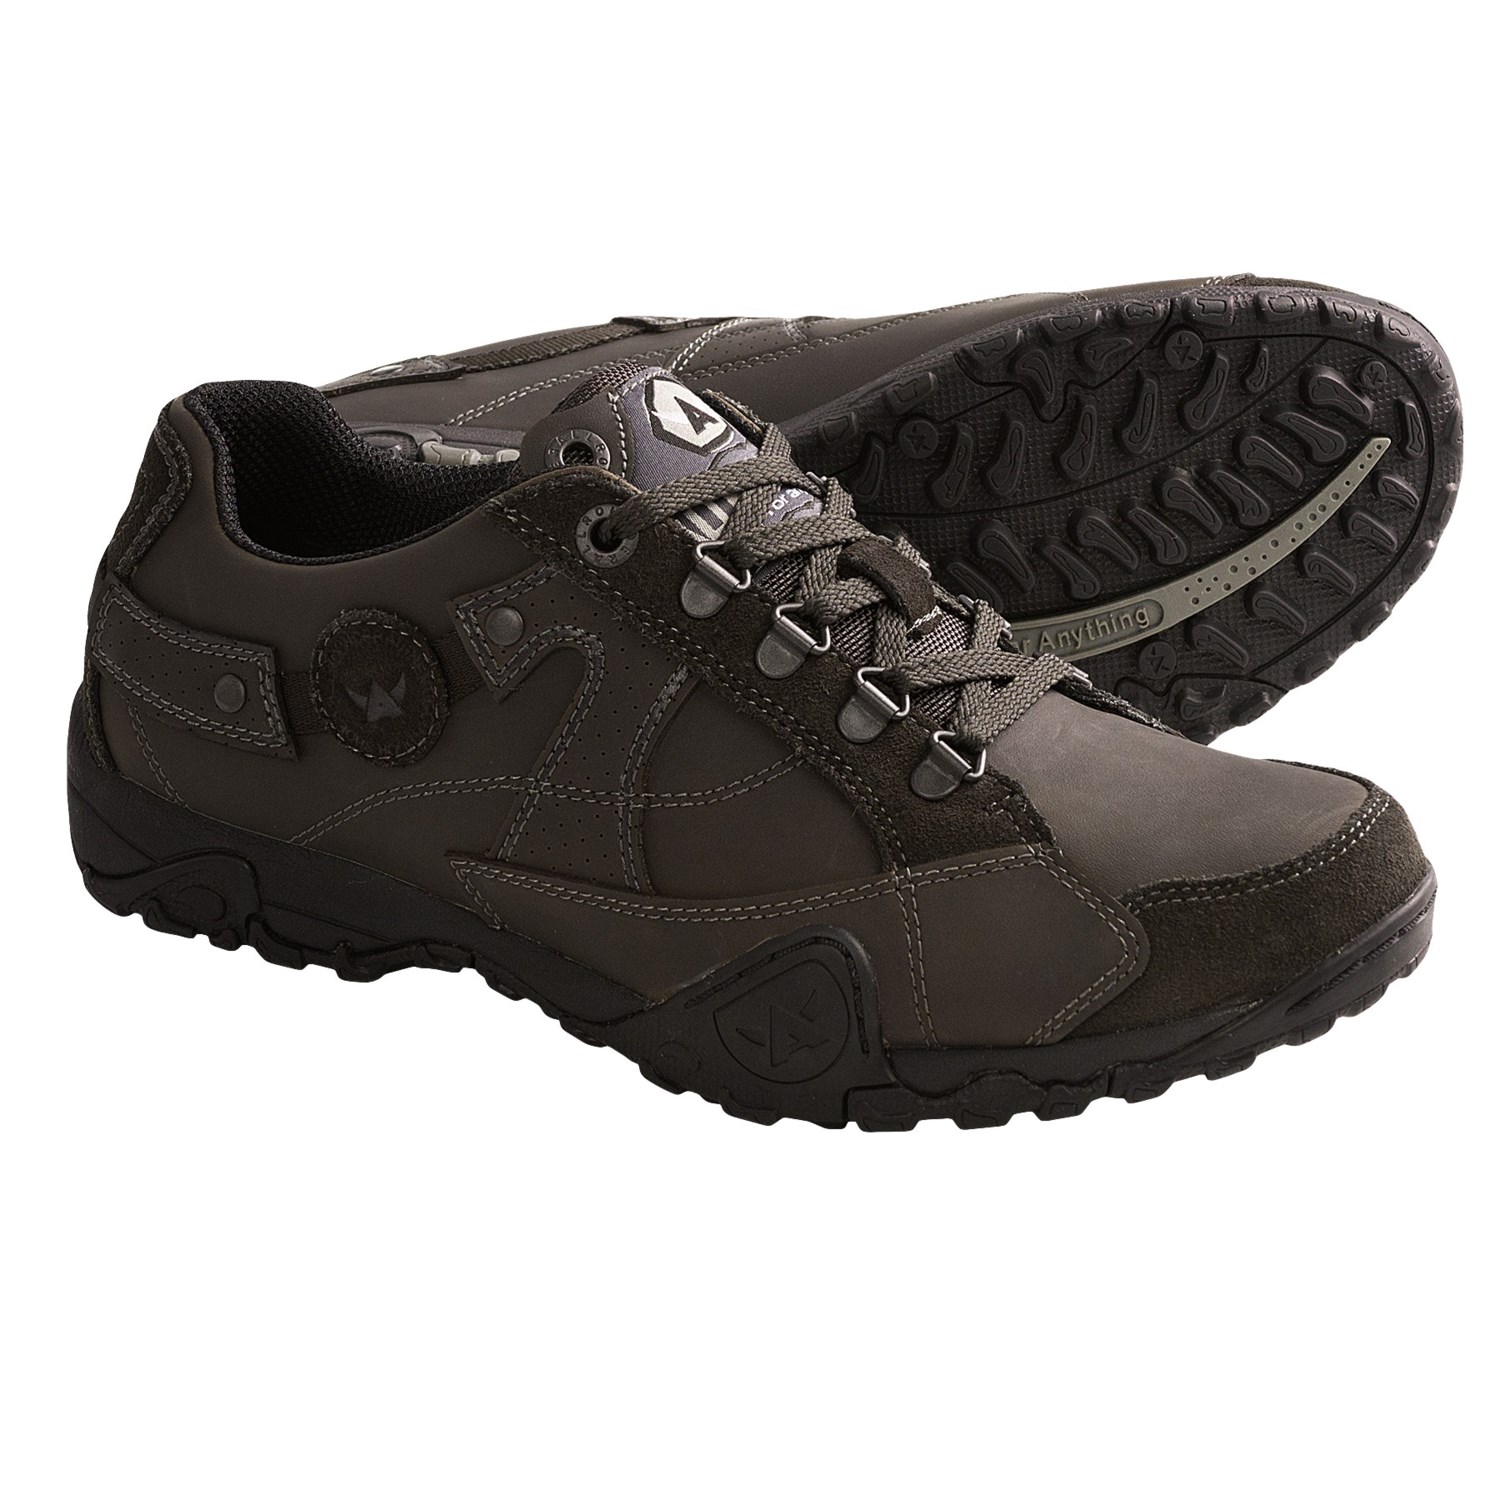 Allrounder by Mephisto Argus Shoes (For Men) - Save 41%